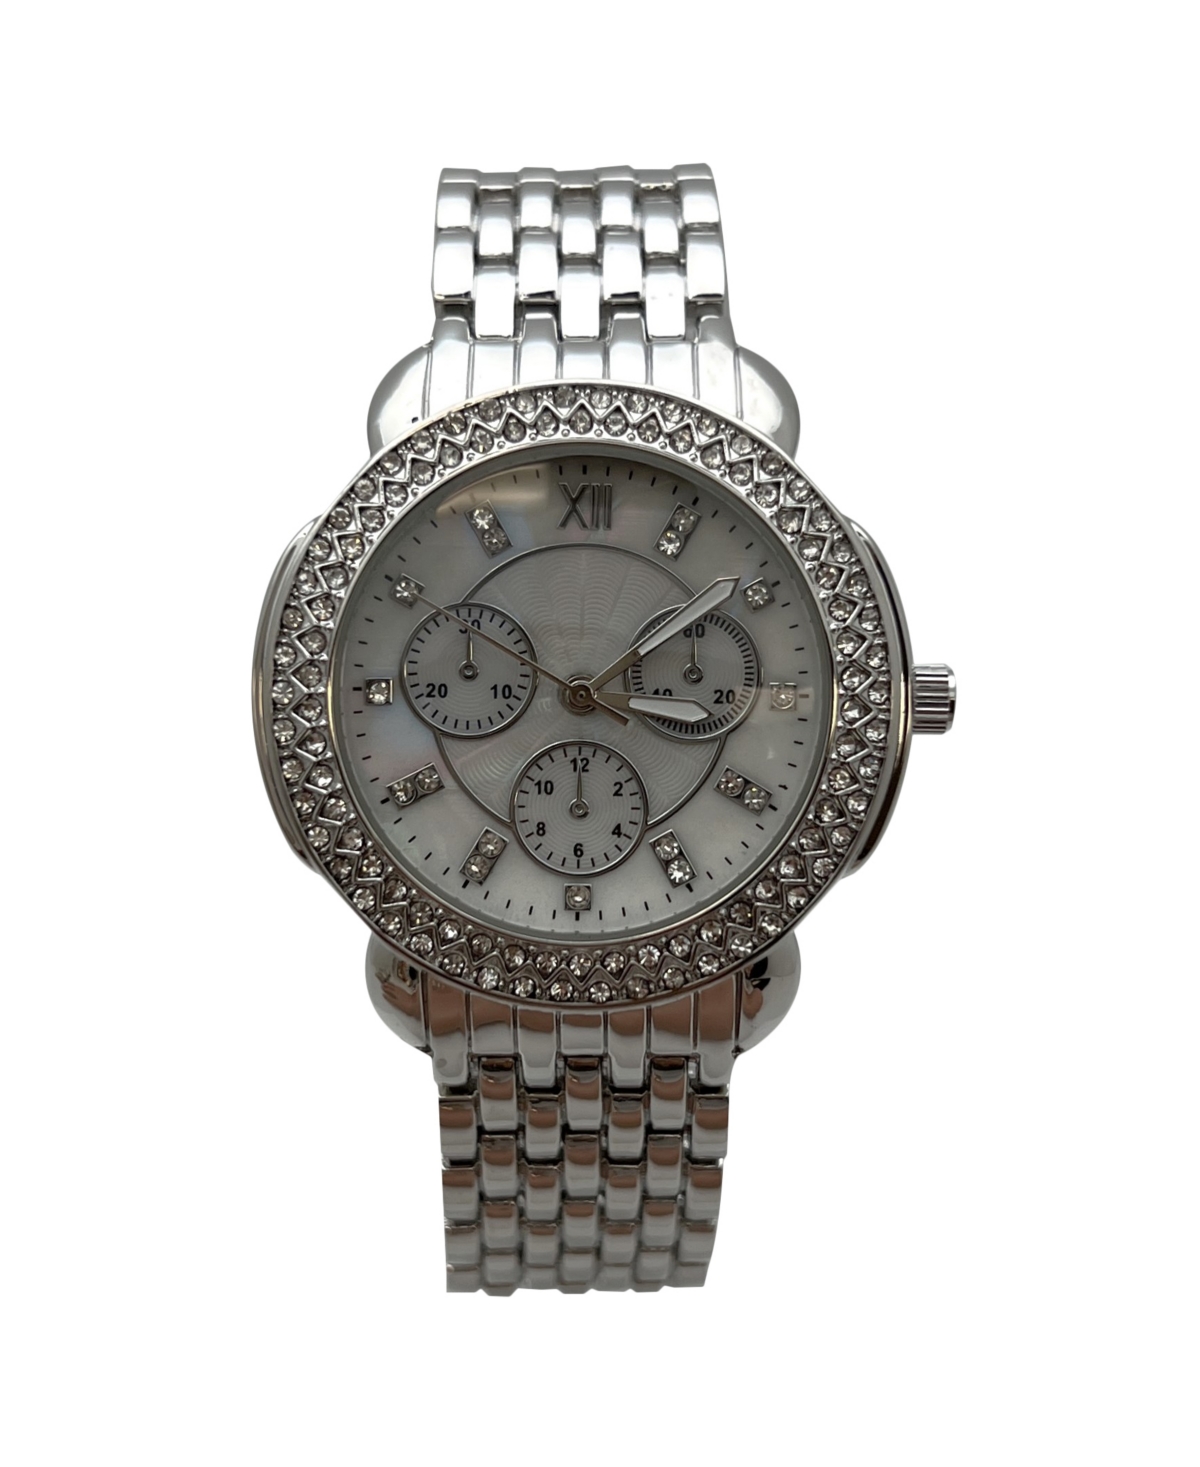 Gold Round Rhinestone and Chrome Face Women Watch - Silver